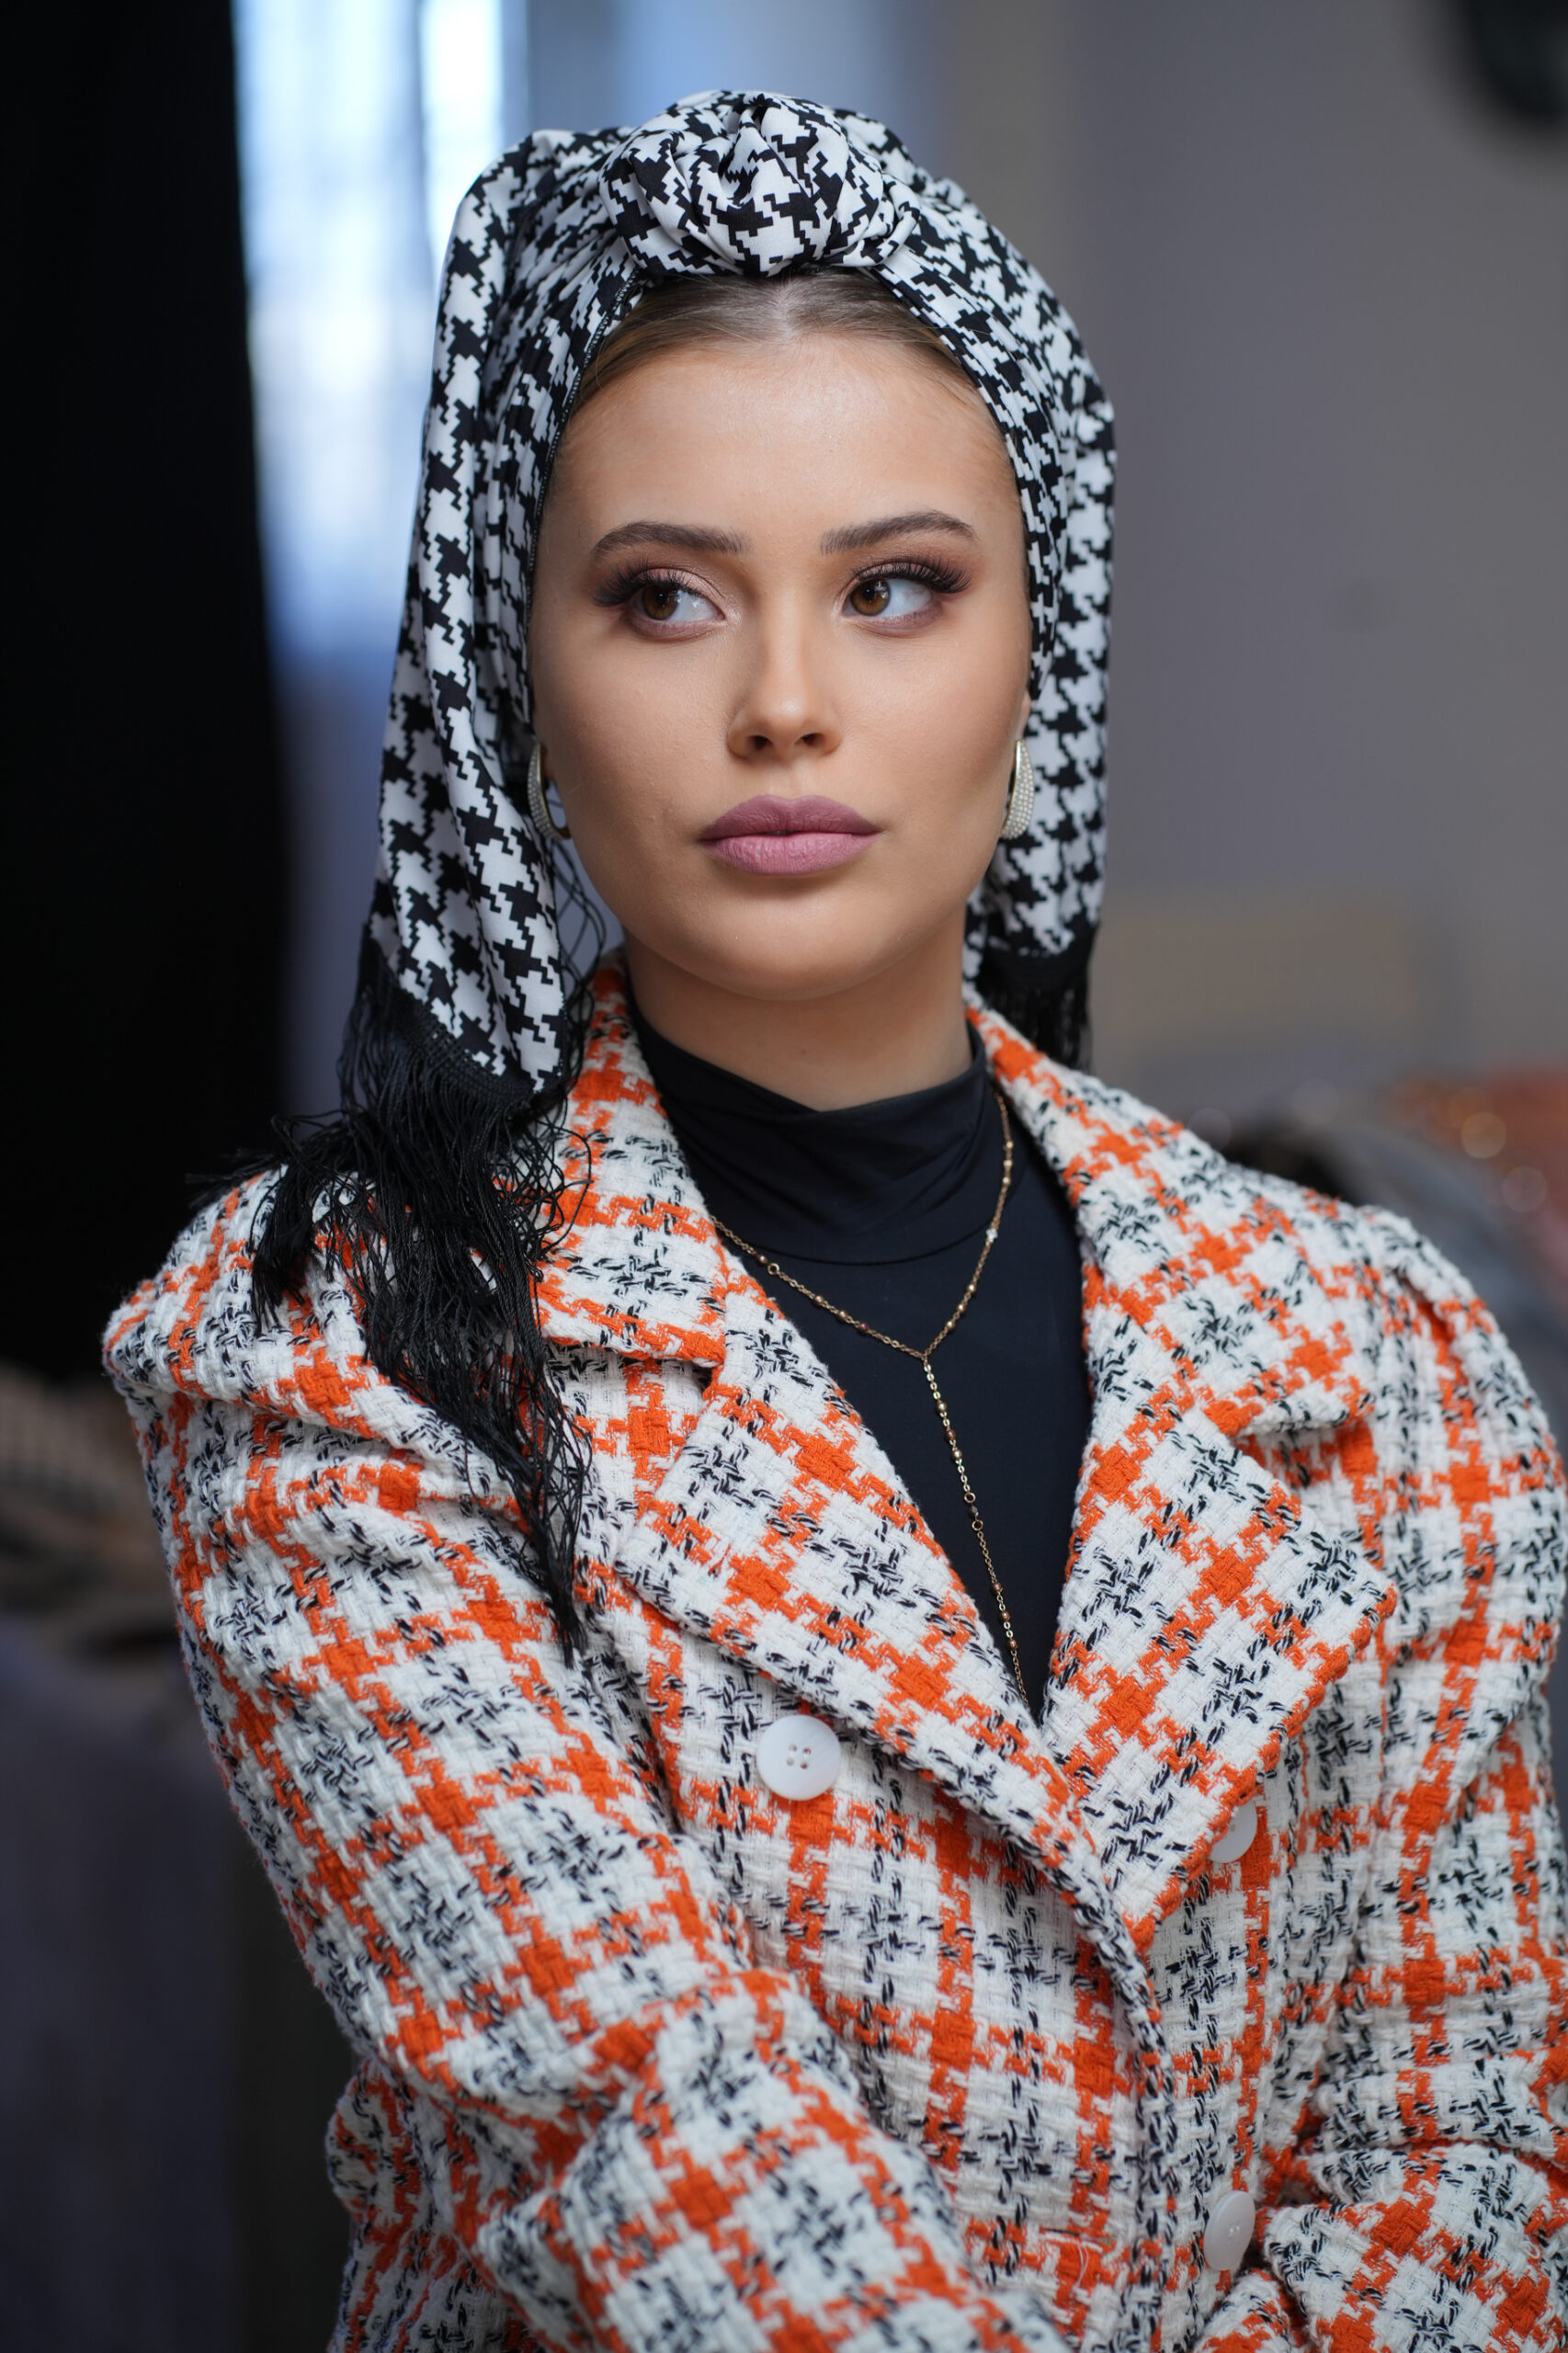 Printed Black and white headscarf with or without fringes